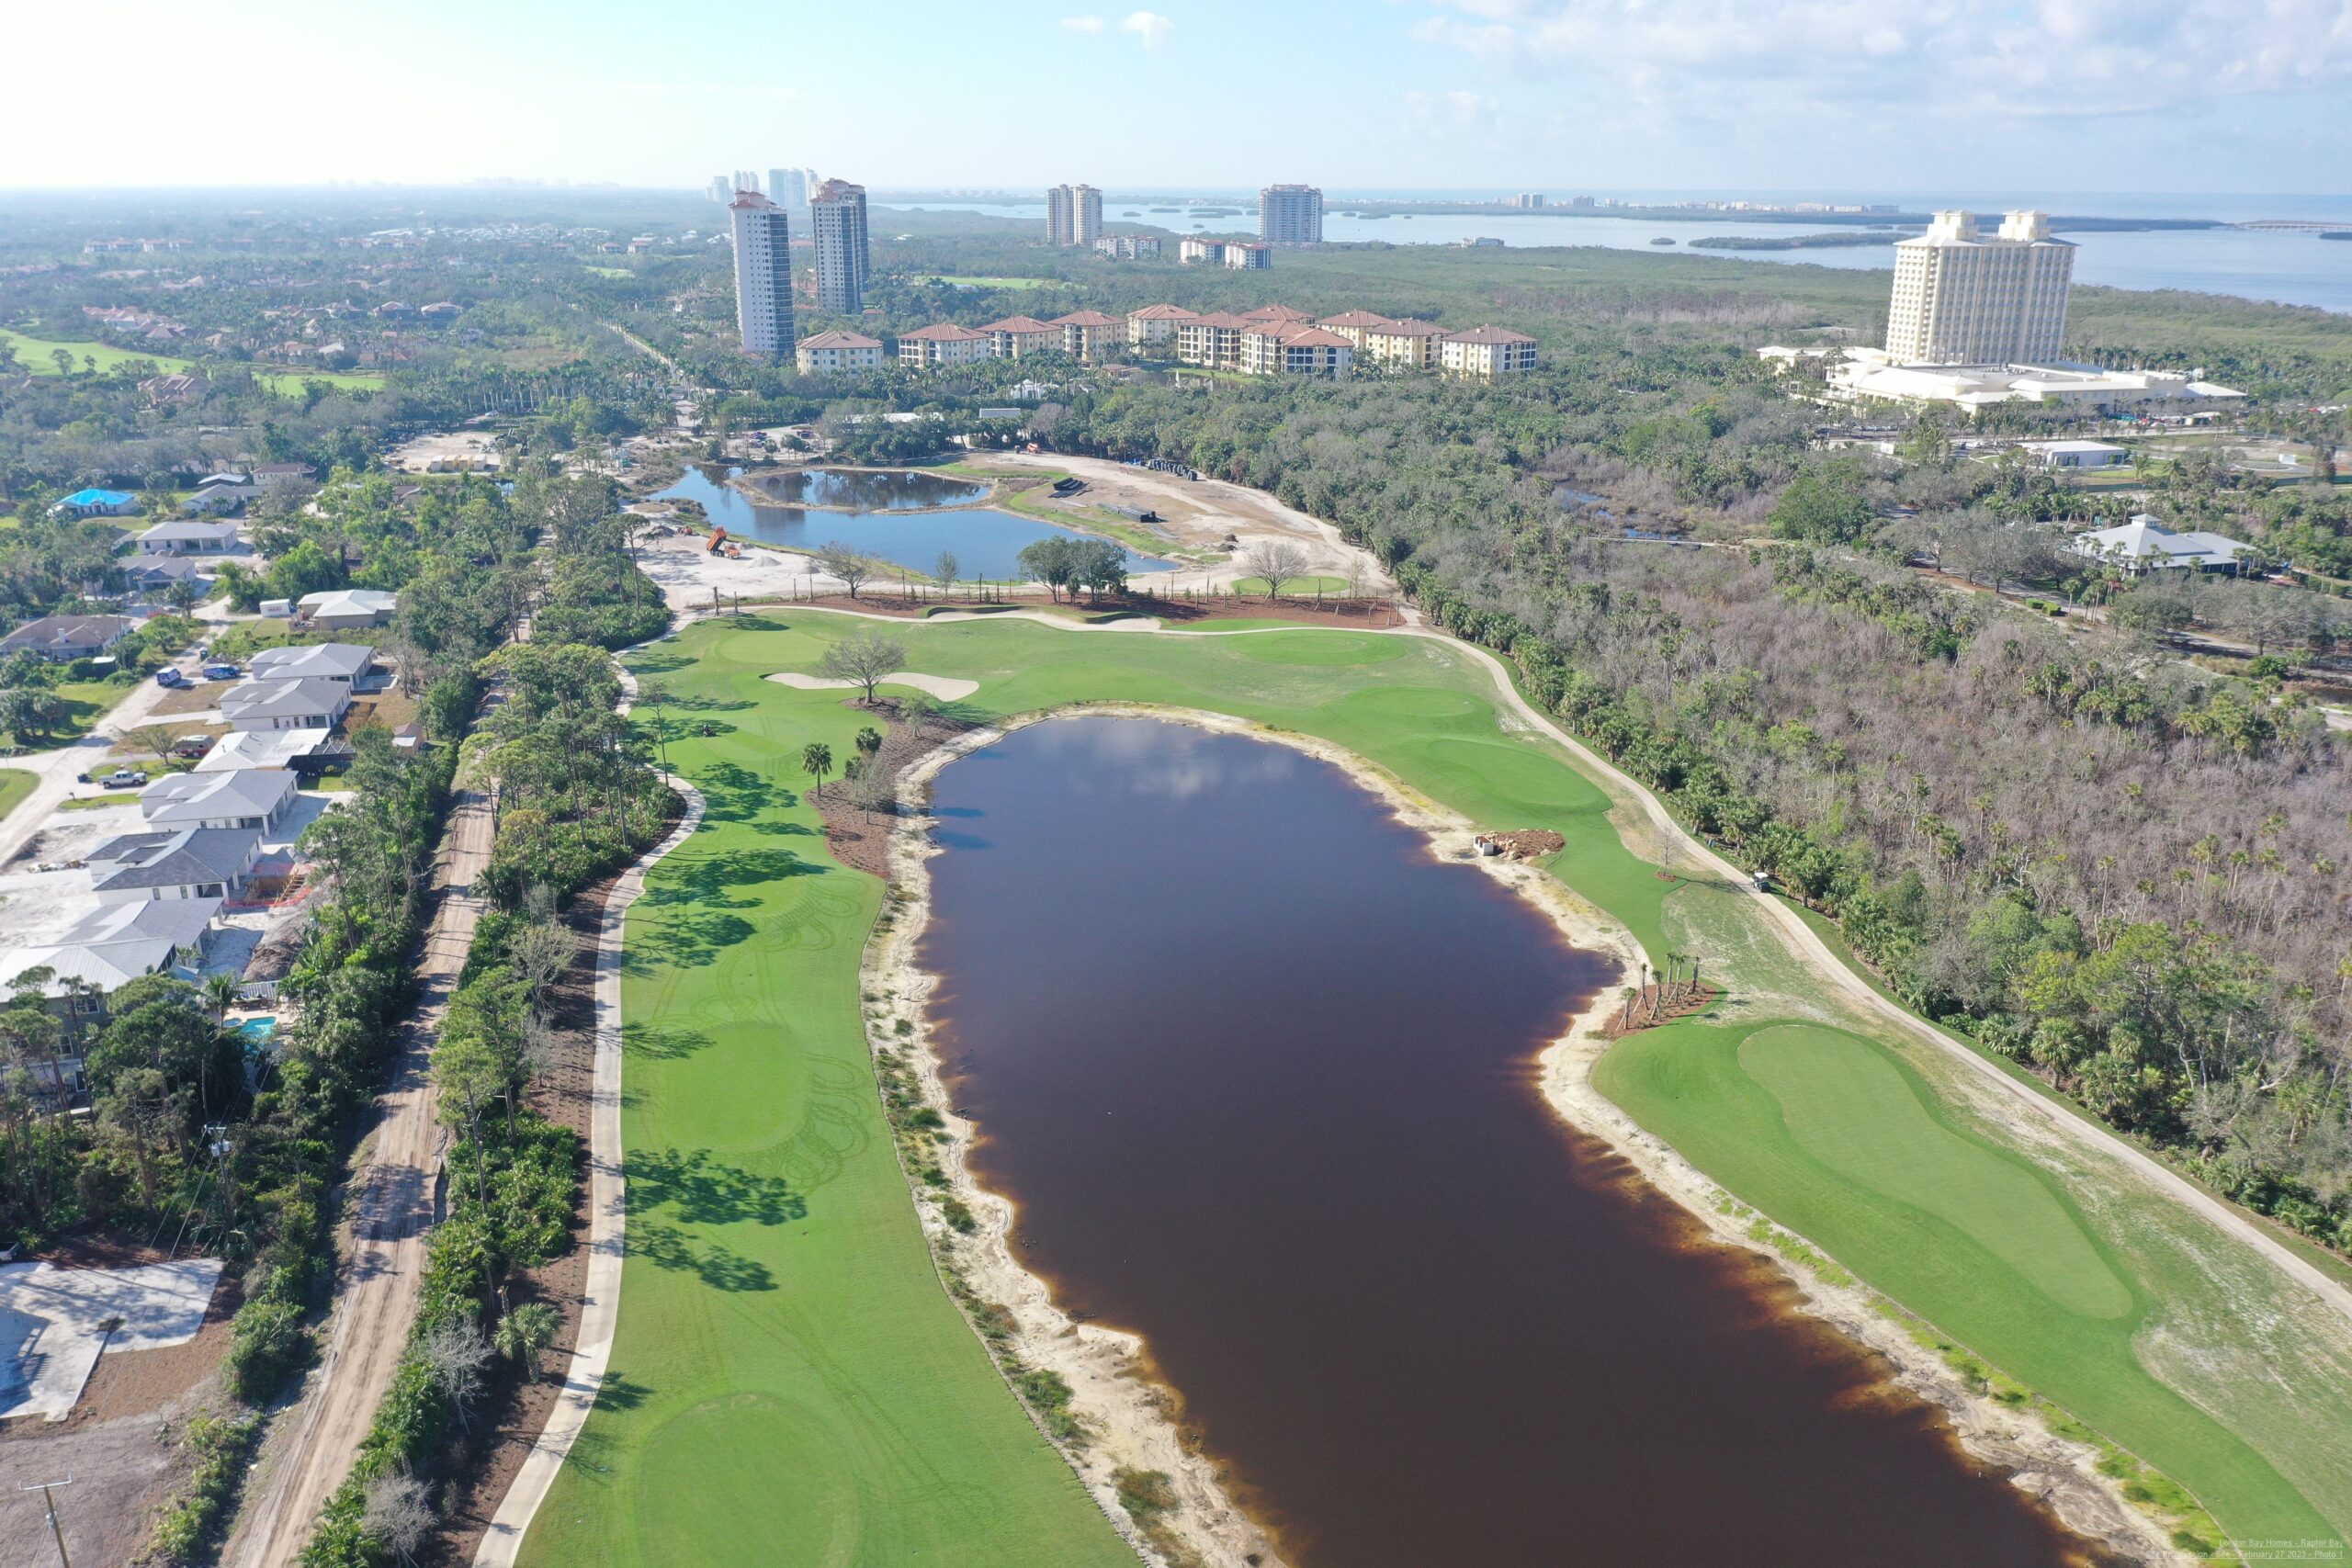 An aerial view of the Saltleaf Golf Preserve, a championship golf course located near Bonita Springs.